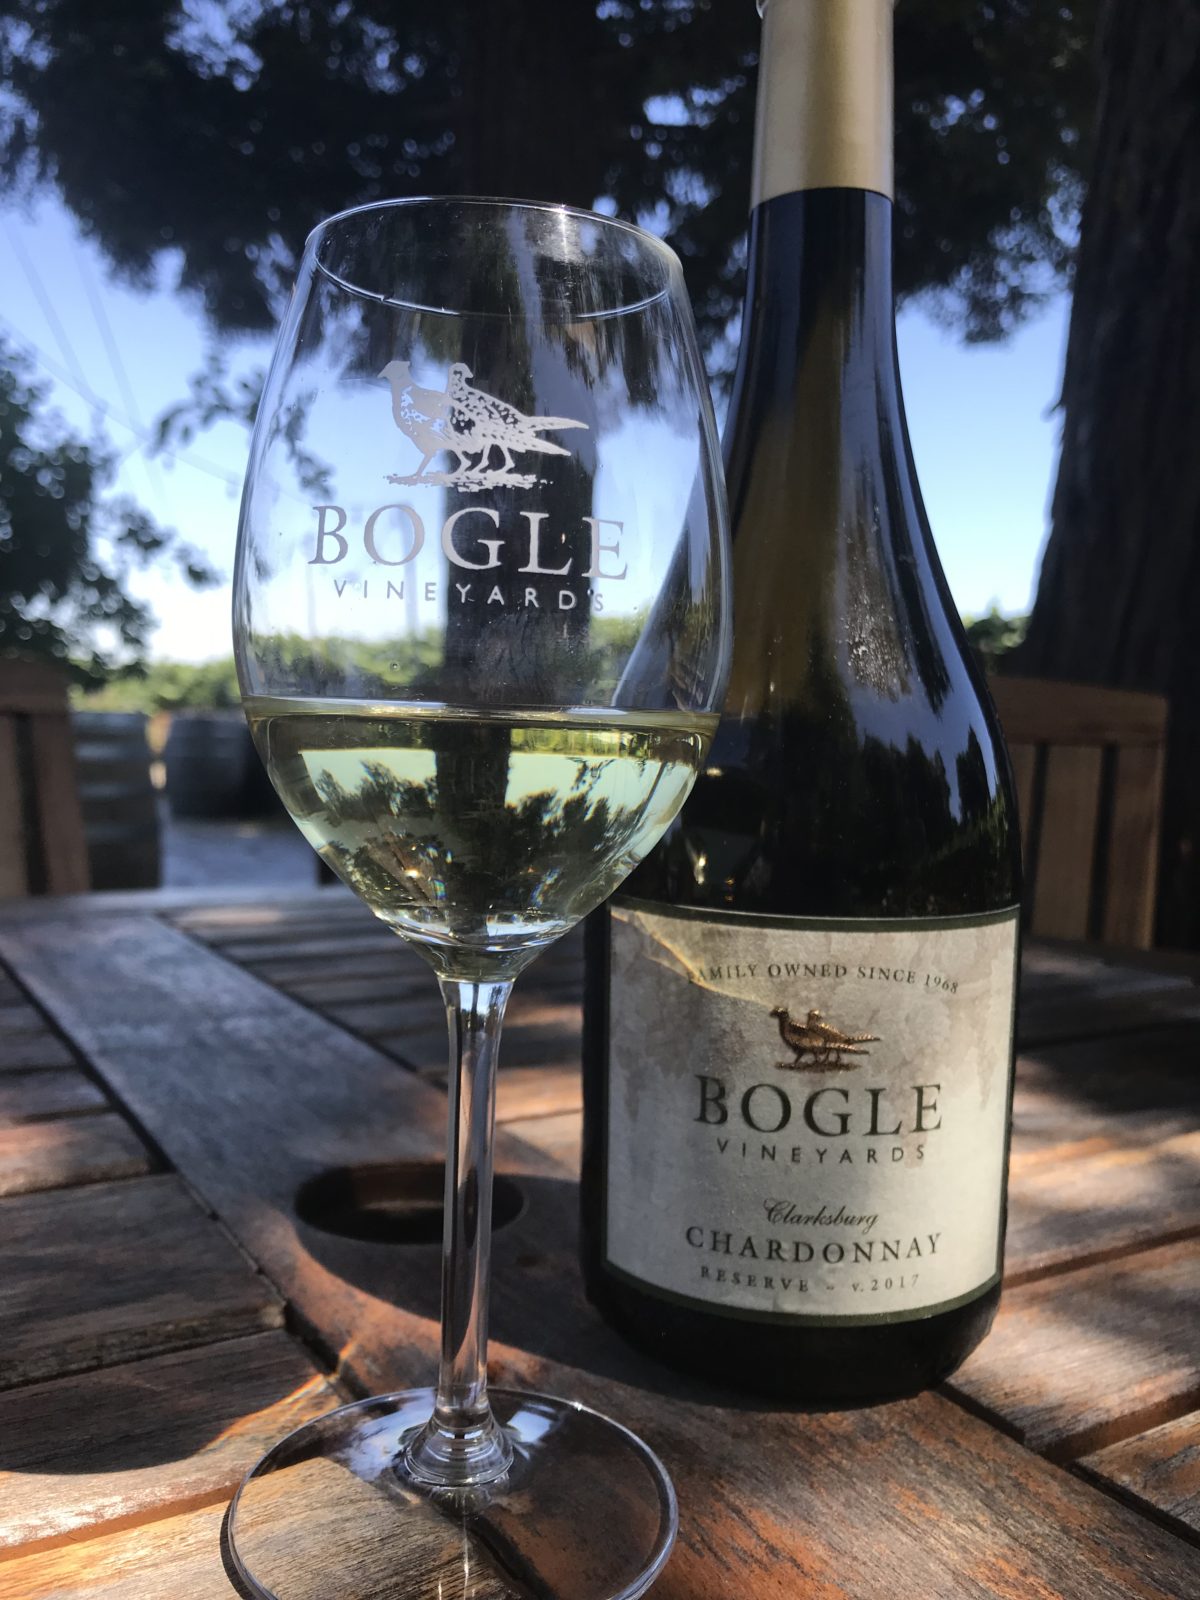 Reserve Chardonnay at Bogle Winery in the California Delta